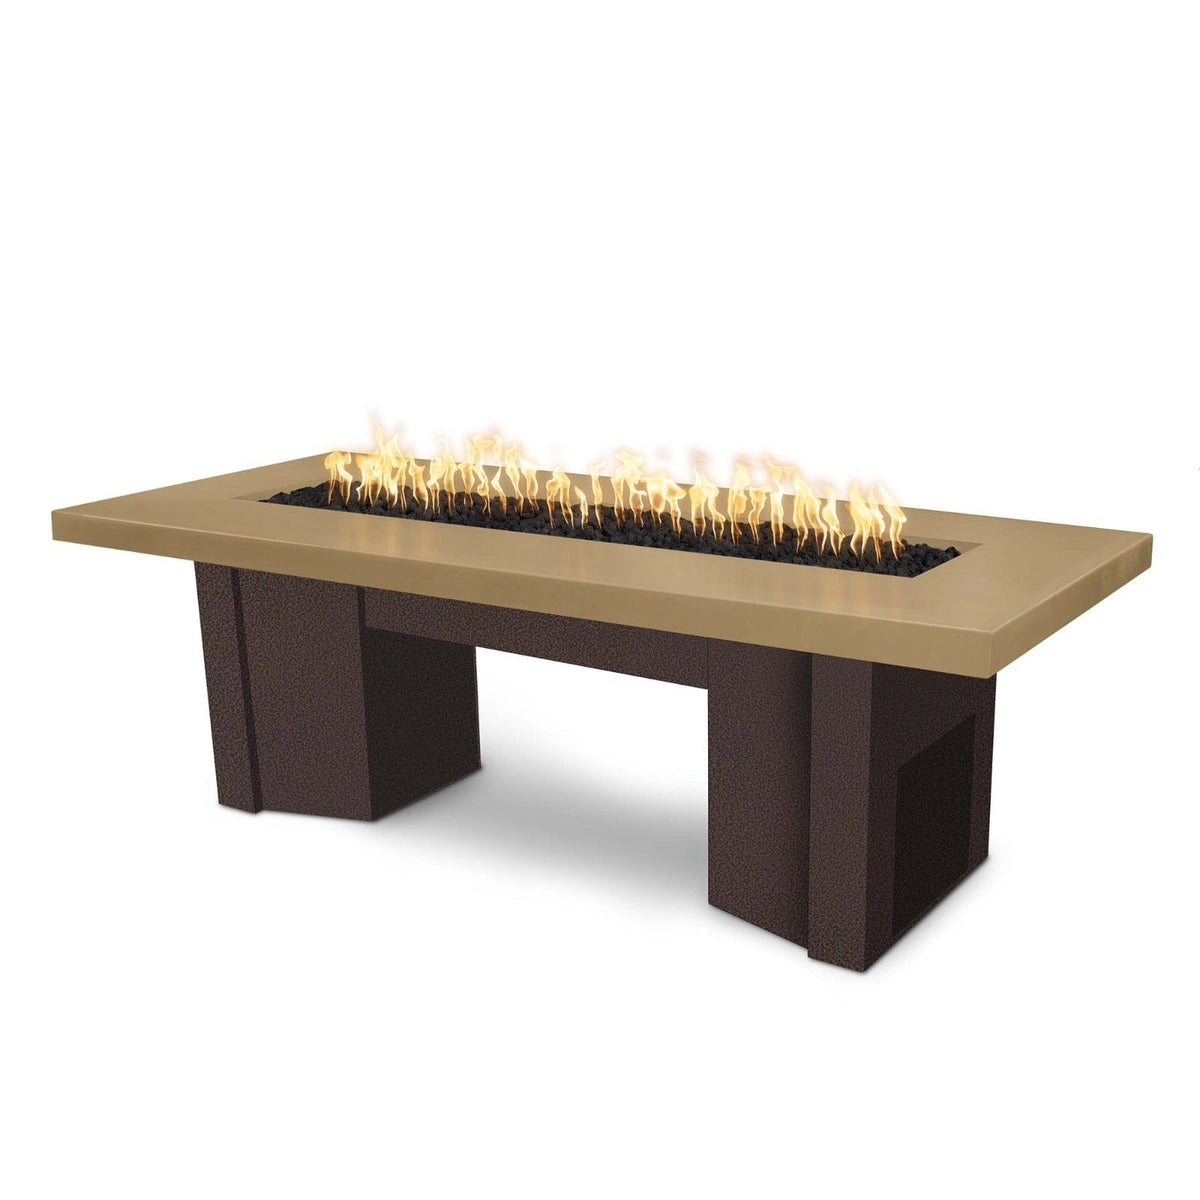 The Outdoor Plus Fire Features Brown (-BRN) / Copper Vein Powder Coated Steel (-CPV) The Outdoor Plus 78&quot; Alameda Fire Table Smooth Concrete in Natural Gas - Flame Sense System with Push Button Spark Igniter / OPT-ALMGFRC78FSEN-NG